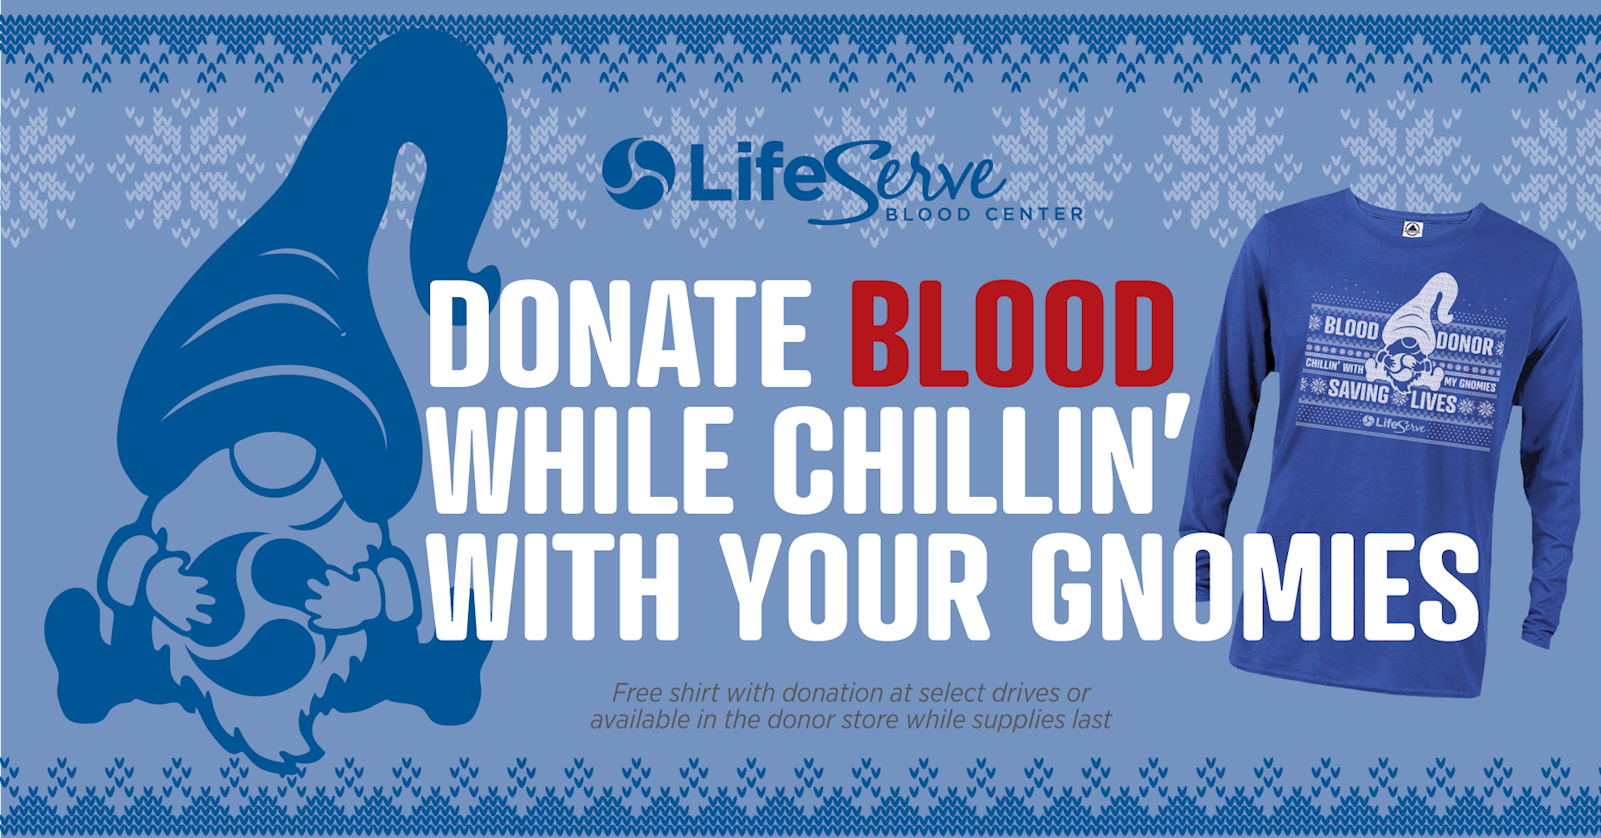 Siouxland News Holiday Blood Drive